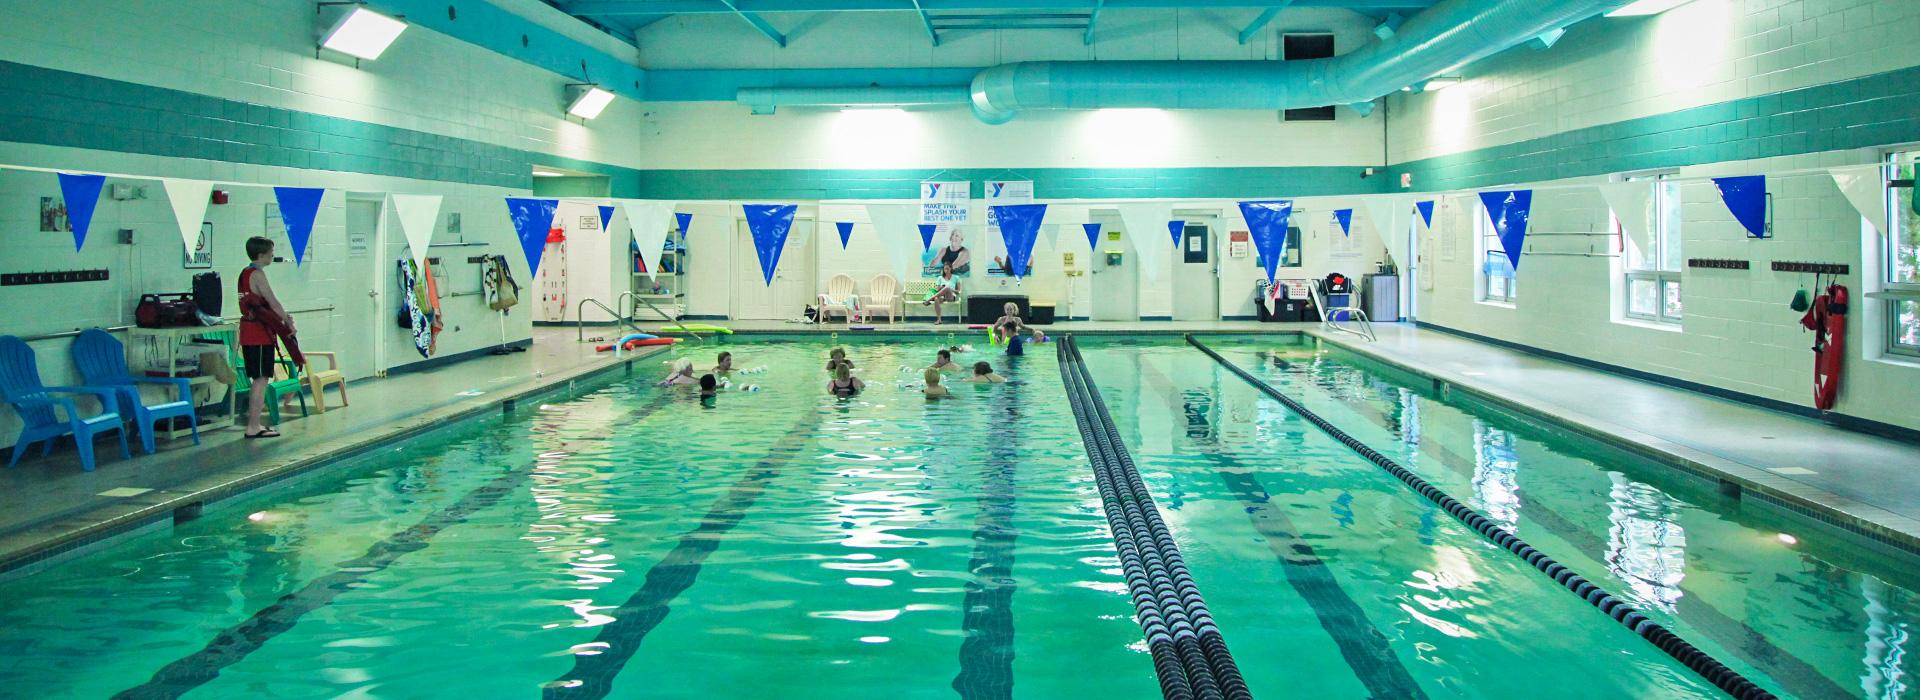 Members swimming in the 25-yard indoor lap swimming pool at the Hilltop Family YMCA